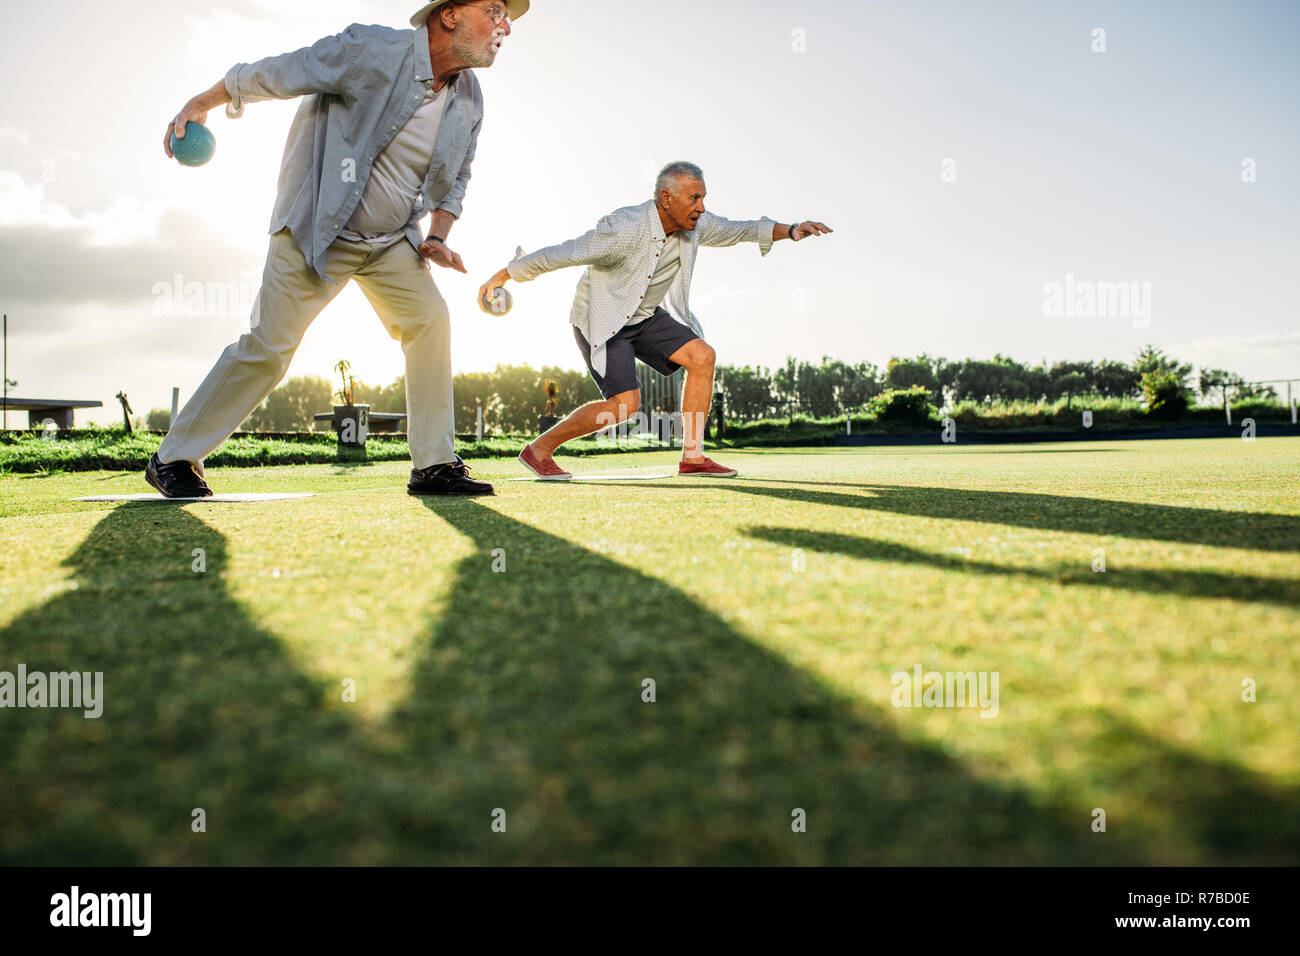 People playing a game of boules in a lawn with sun in the background. Two senior persons bending forward to throw  boules with their shadows on ground Stock Photo